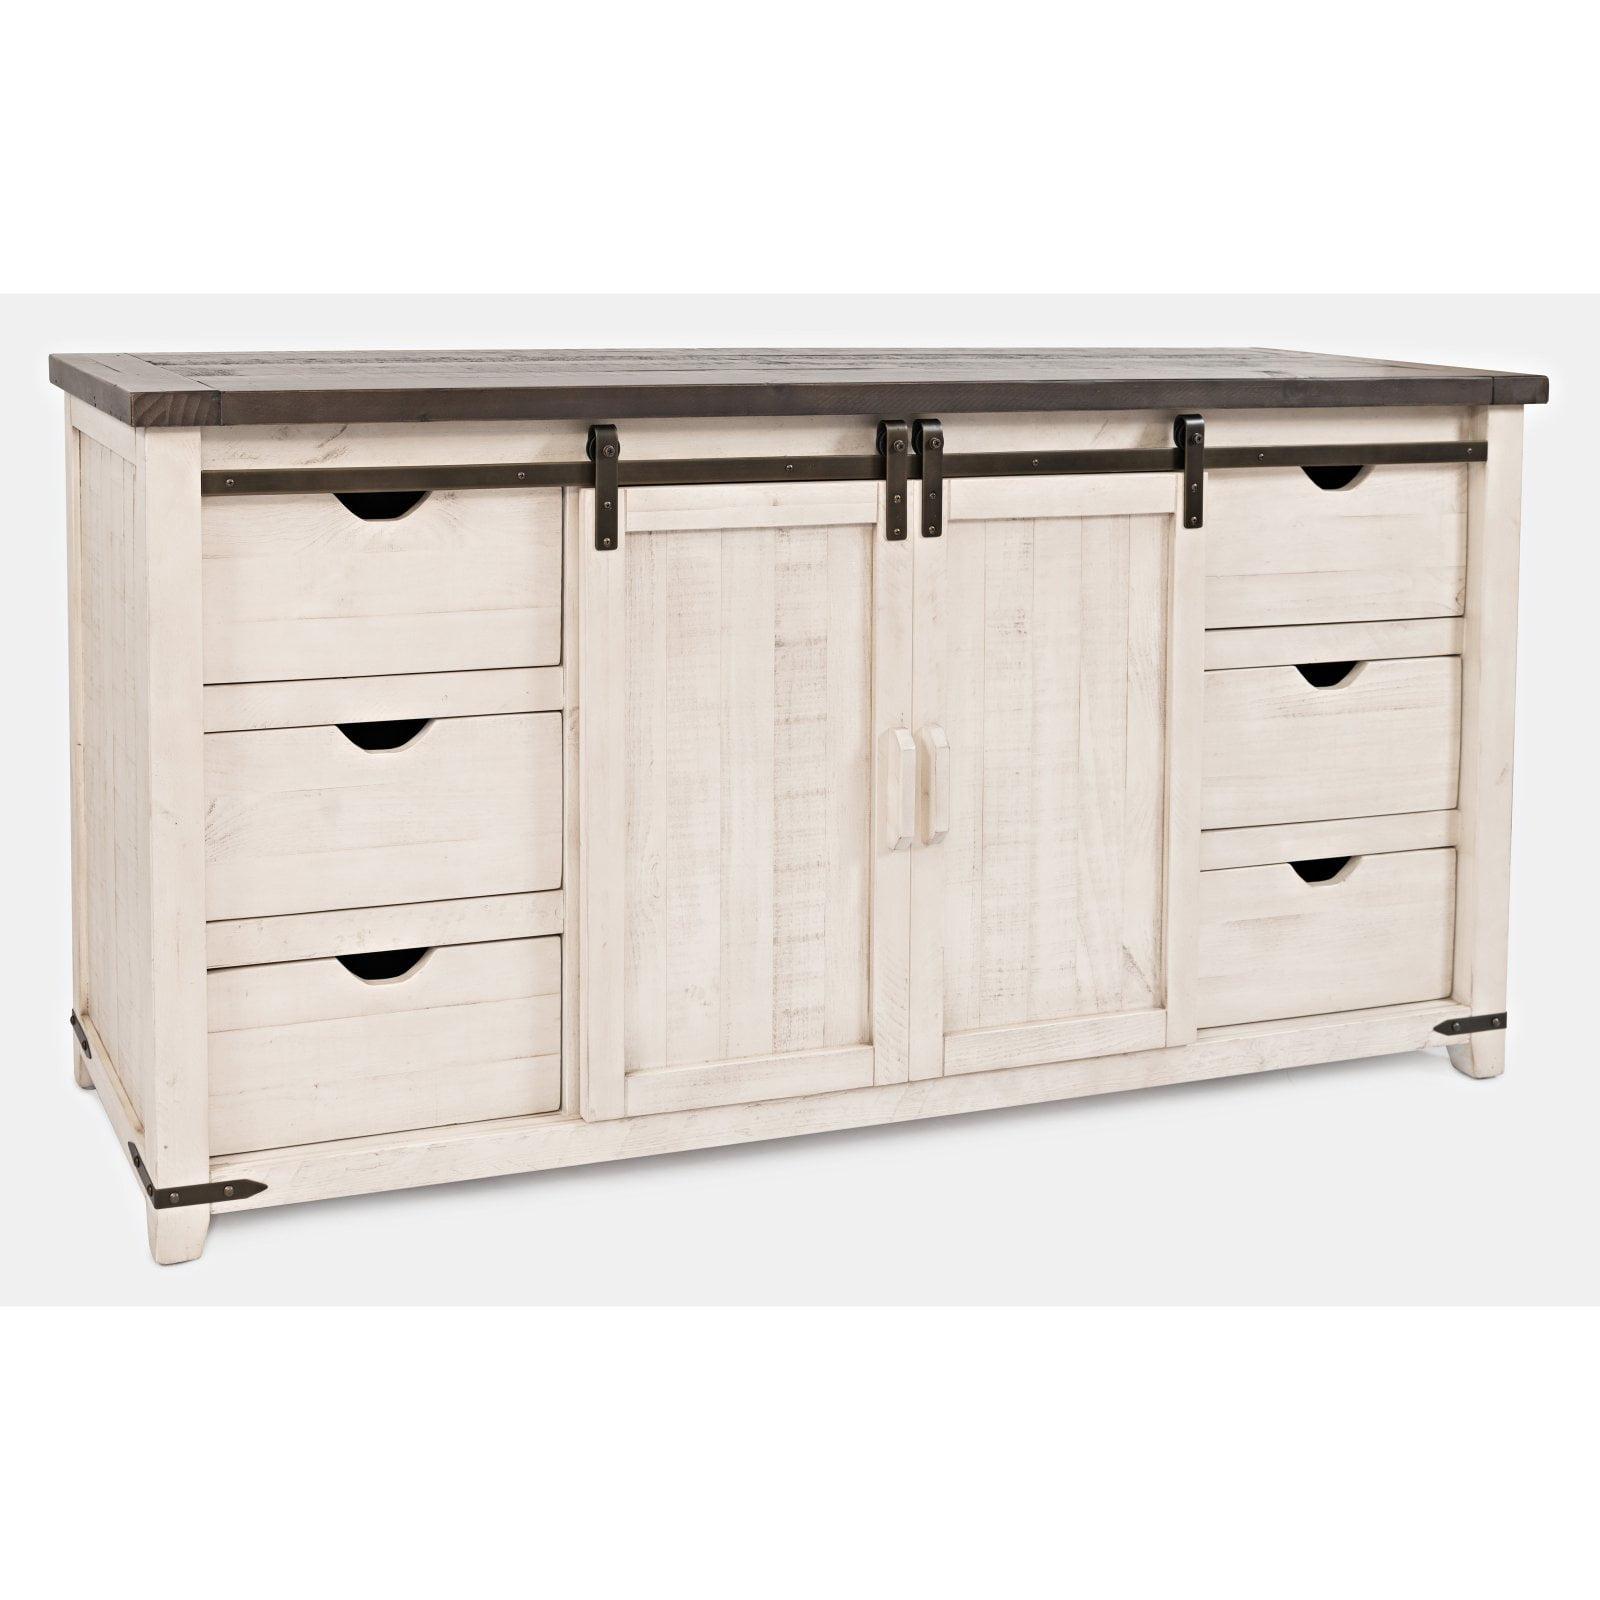 Rustic White Mirrored 60" Pine Barn Door Server with 6 Drawers